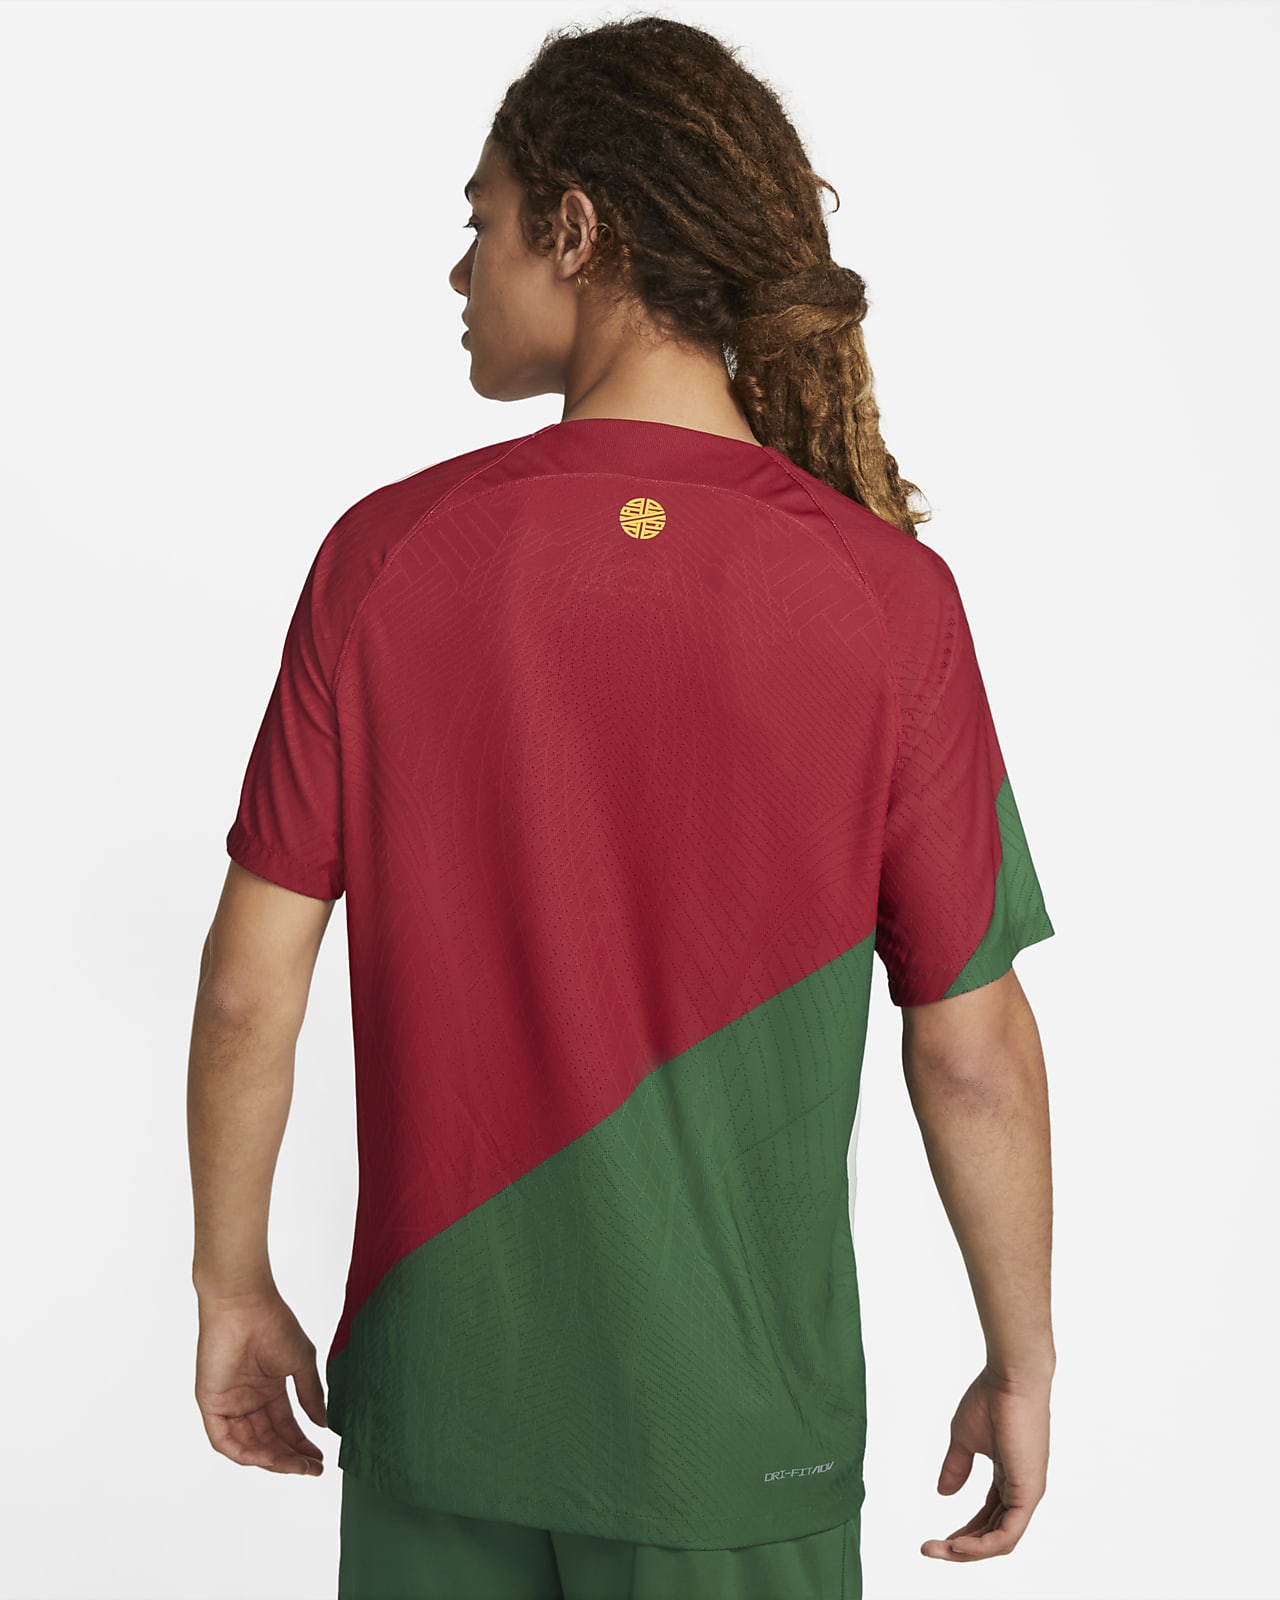 NIKE PORTUGAL 2022 HOME JERSEY (RED/GREEN)